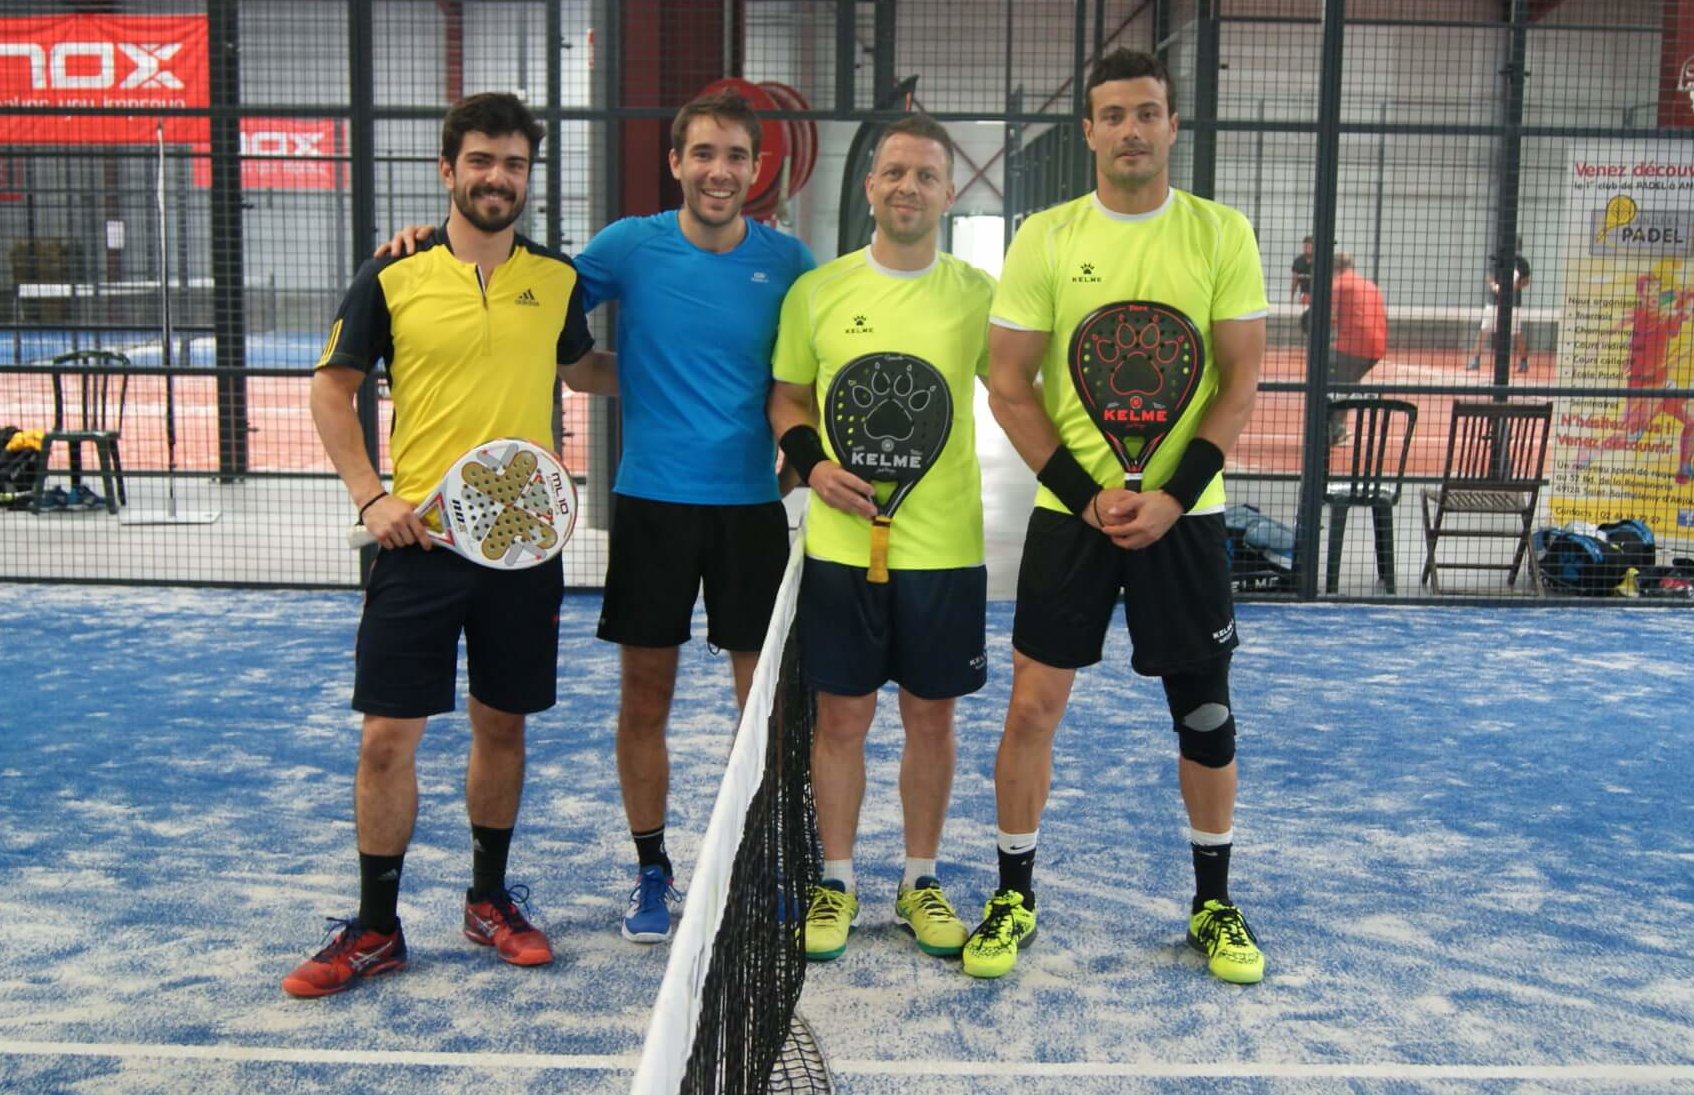 Maucourt / Boilevin ved P500 i Angers Padel